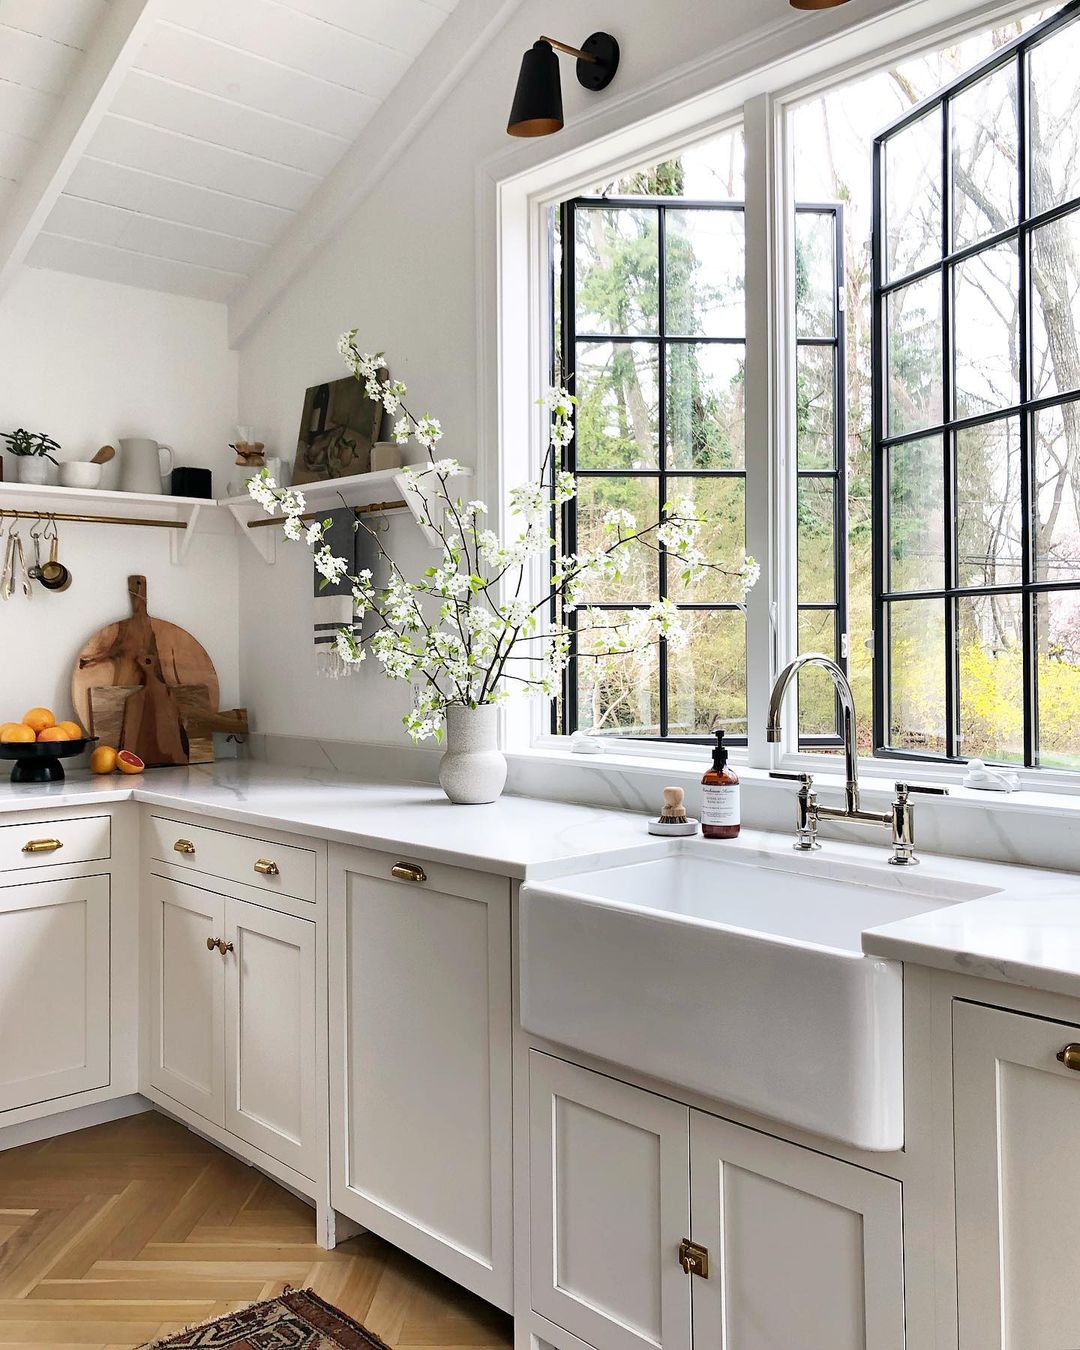 Updated Farmhouse Style Kitchen with New Energy Efficient Windows. Photo by Instagram user @simpleofferings